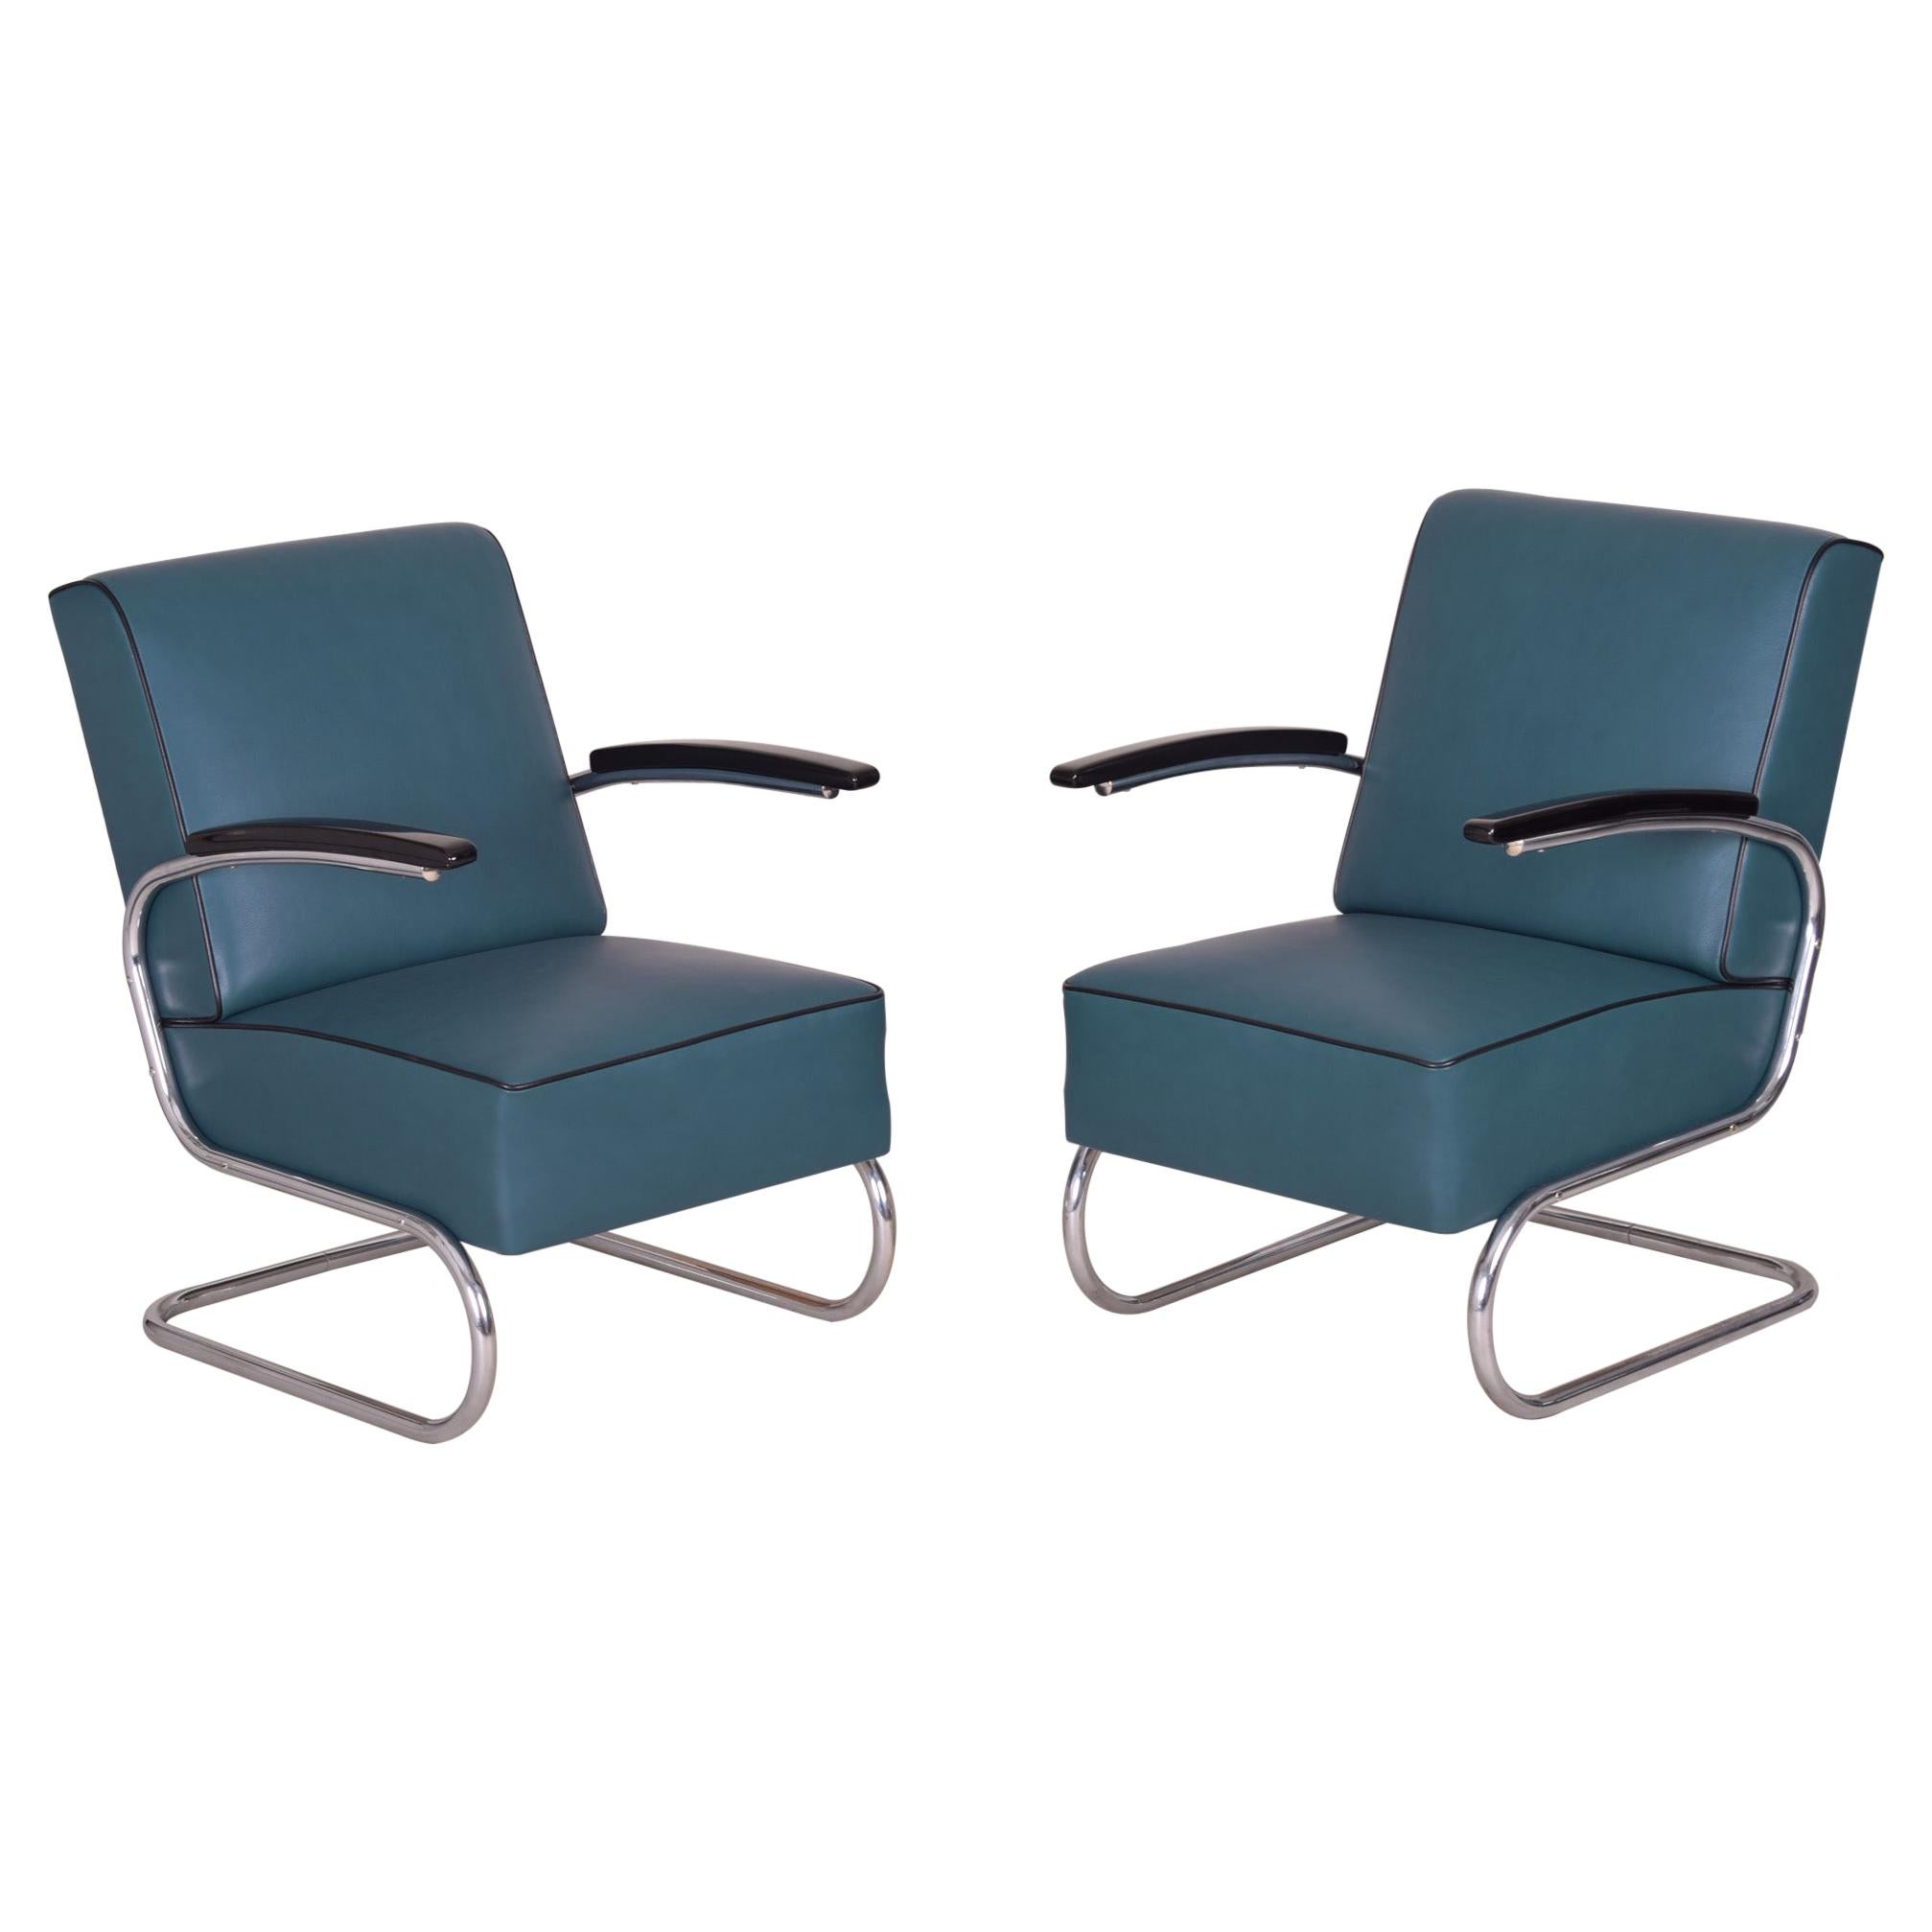 Bauhaus Tubular Chrome Armchairs by Mücke Melder, Restored Leather, 1930s For Sale